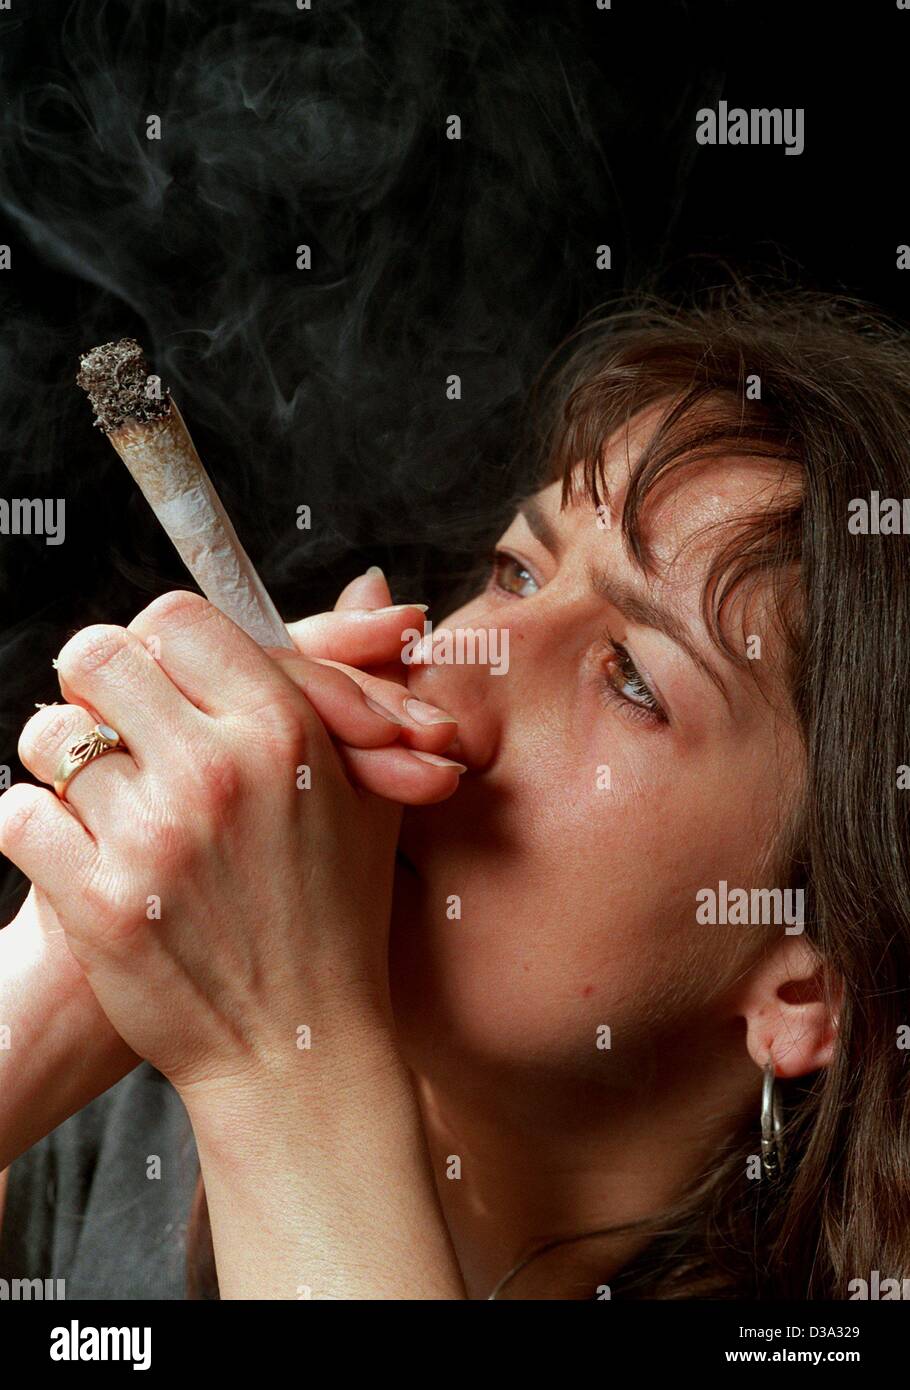 (dpa files) - An undated file picture shows Sabine smoking a joint in Frankfurt. Stock Photo